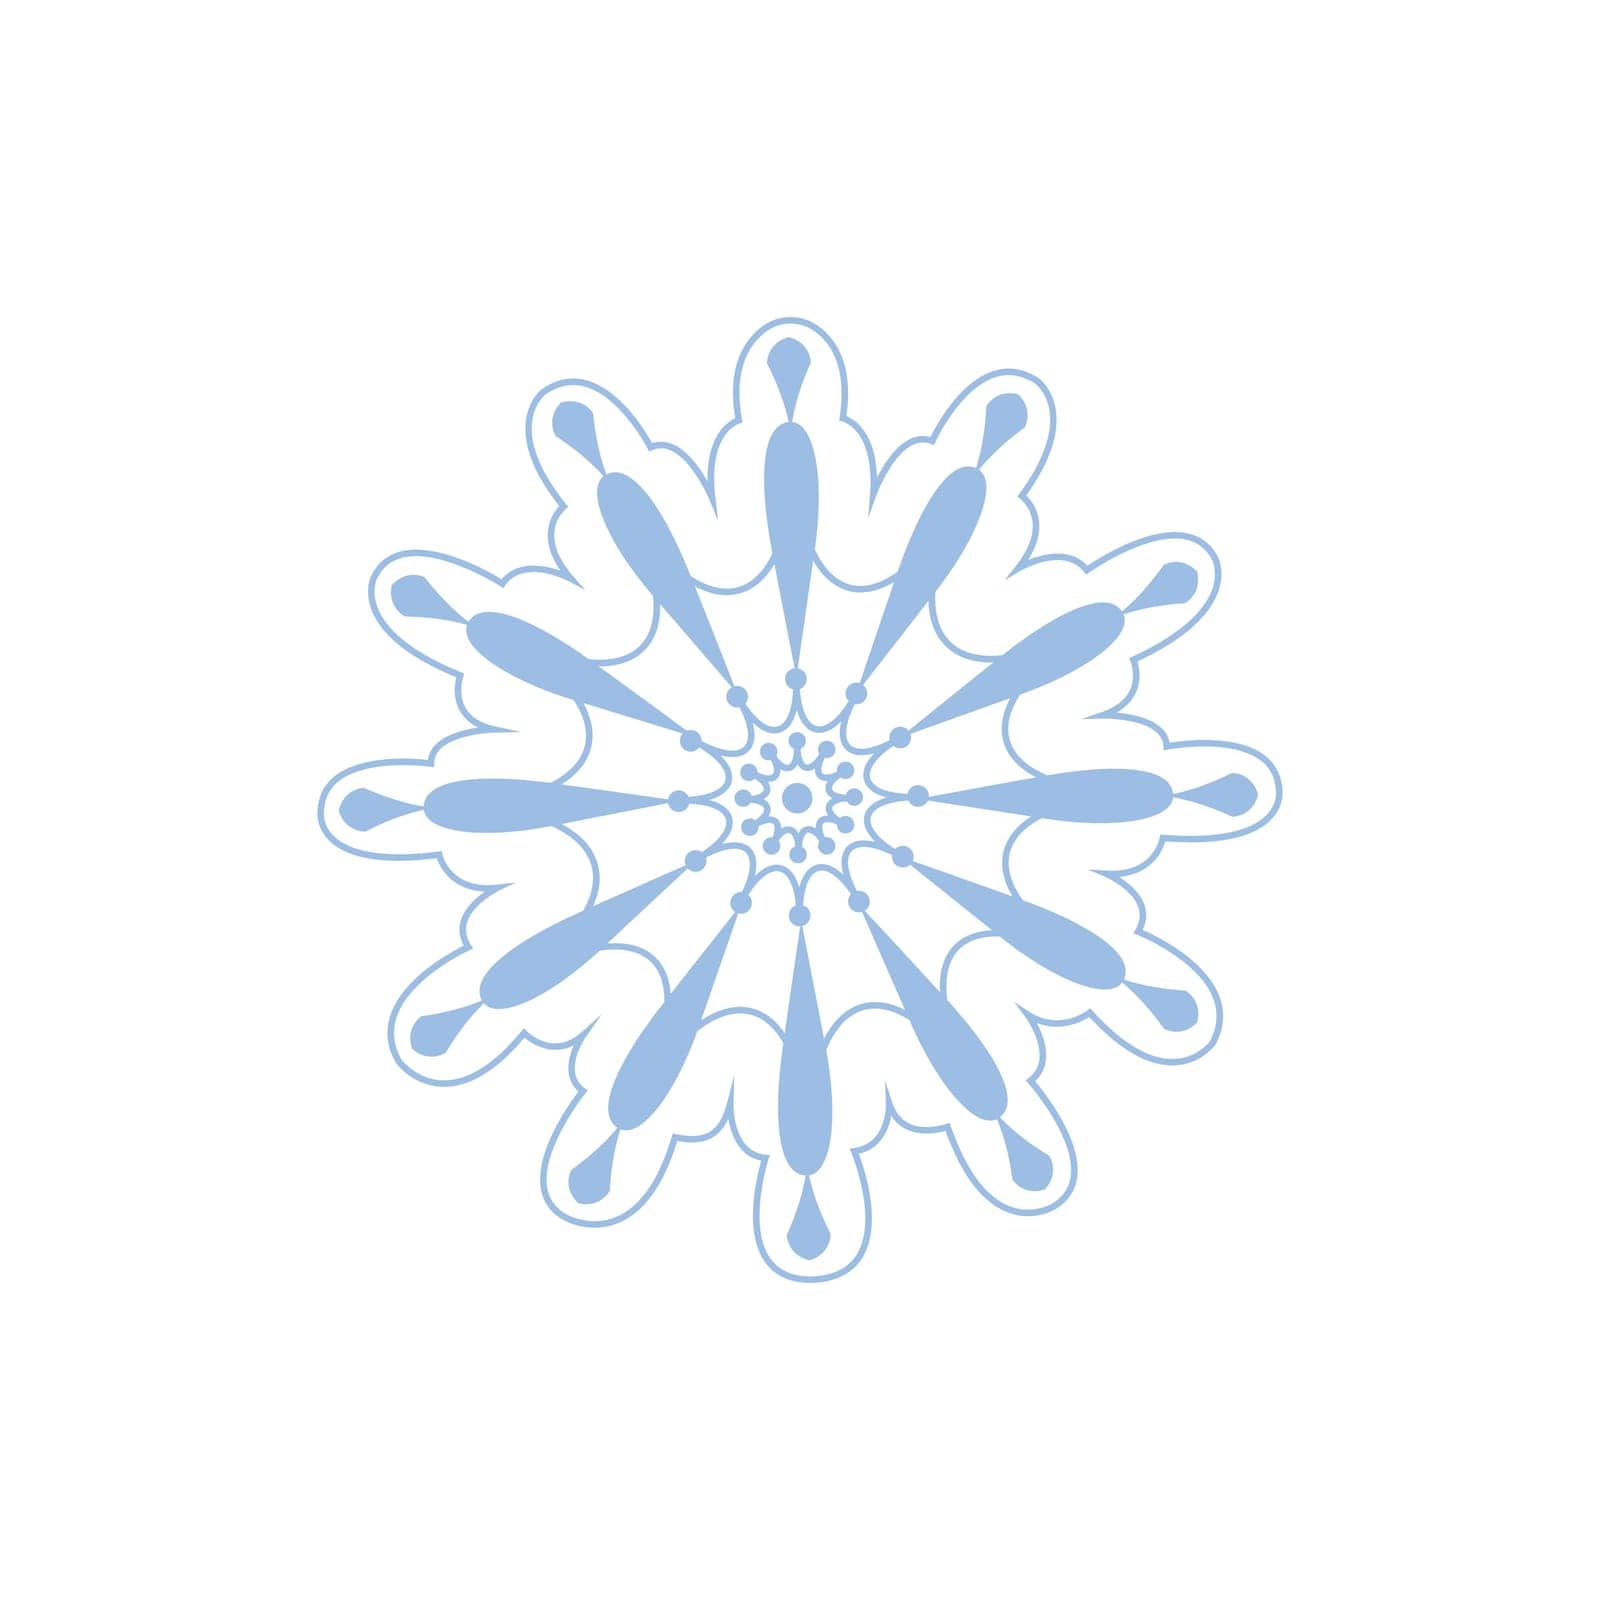 Snowflake. Beautiful snowflake in cartoon style. A white snowflake on a white background. Winter Christmas illustration. Vector by NastyaN